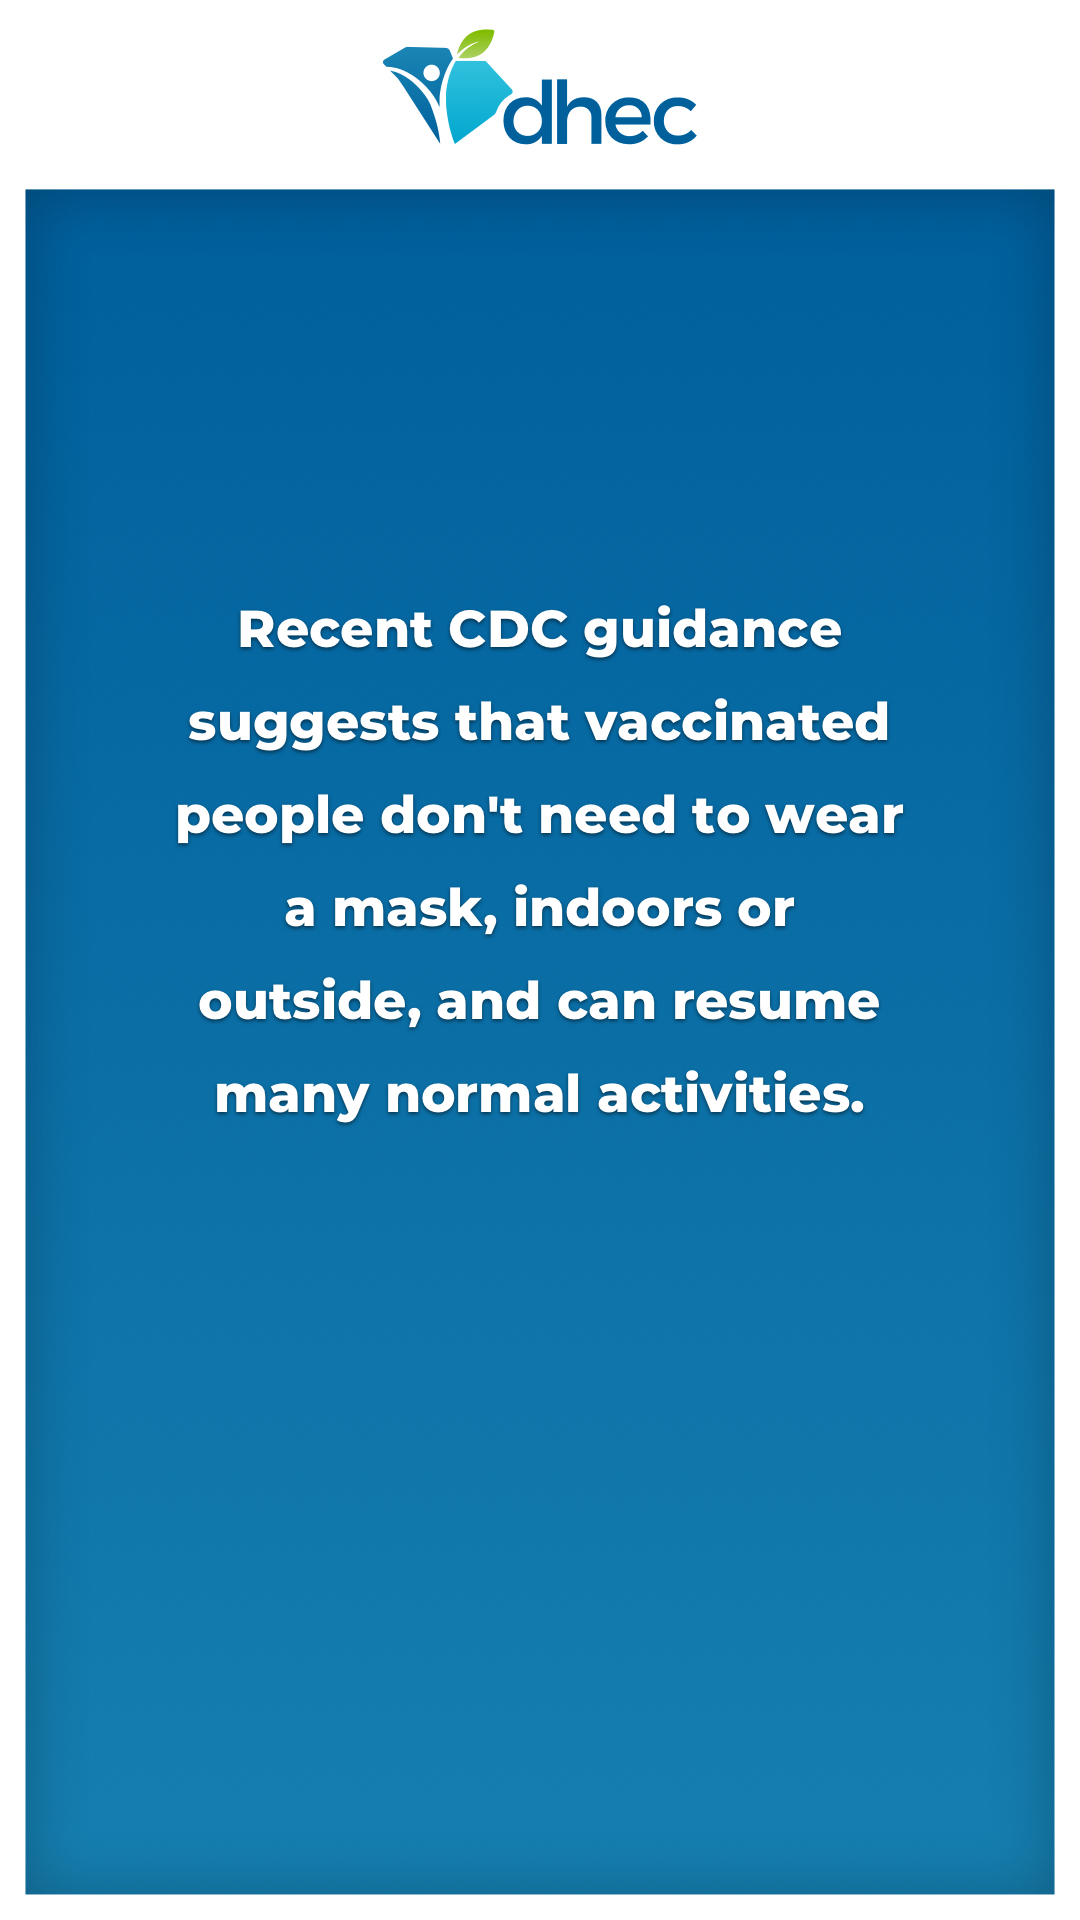 Recent CDC guidance suggests that vaccinated people don't need to wear a mask, indoors or outside, and can resume many normal activities.